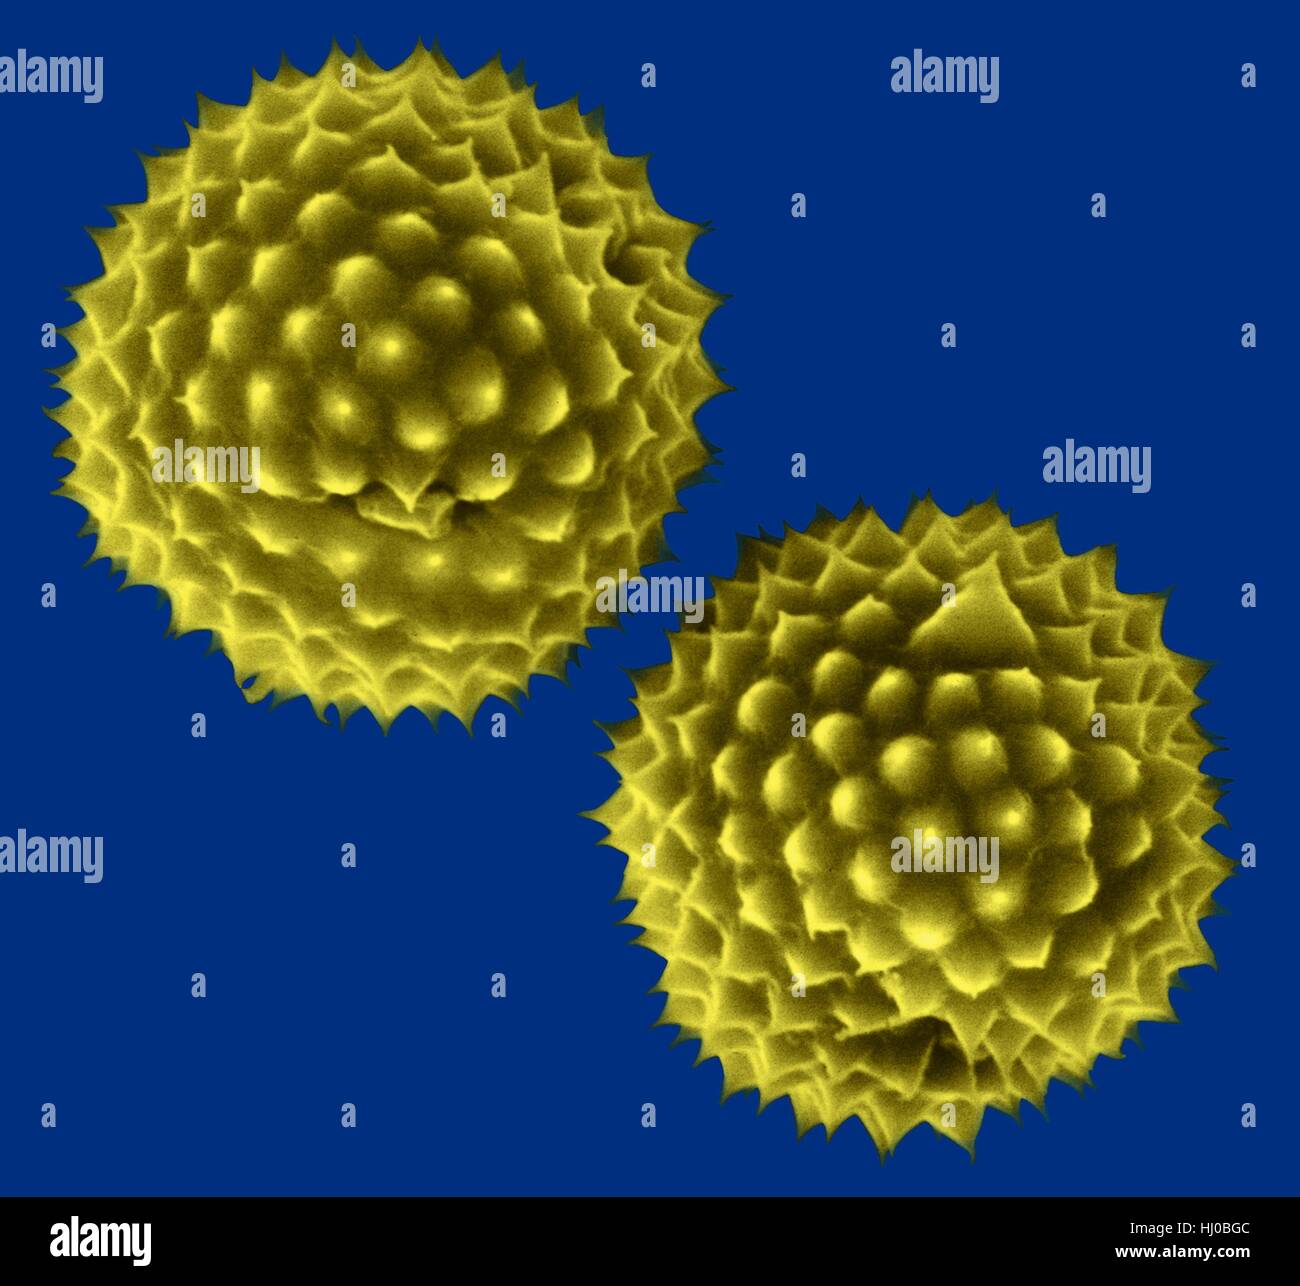 Ragweed pollen,Ambrosia psilostachya,coloured scanning electron micrograph (SEM).This pollen is allergen.Ragweed is main cause of weed allergies.Ragweed pollen is notorious for causing allergic reactions in humans,specifically allergic rhinitis.Up to half of all cases of pollen-related allergic Stock Photo